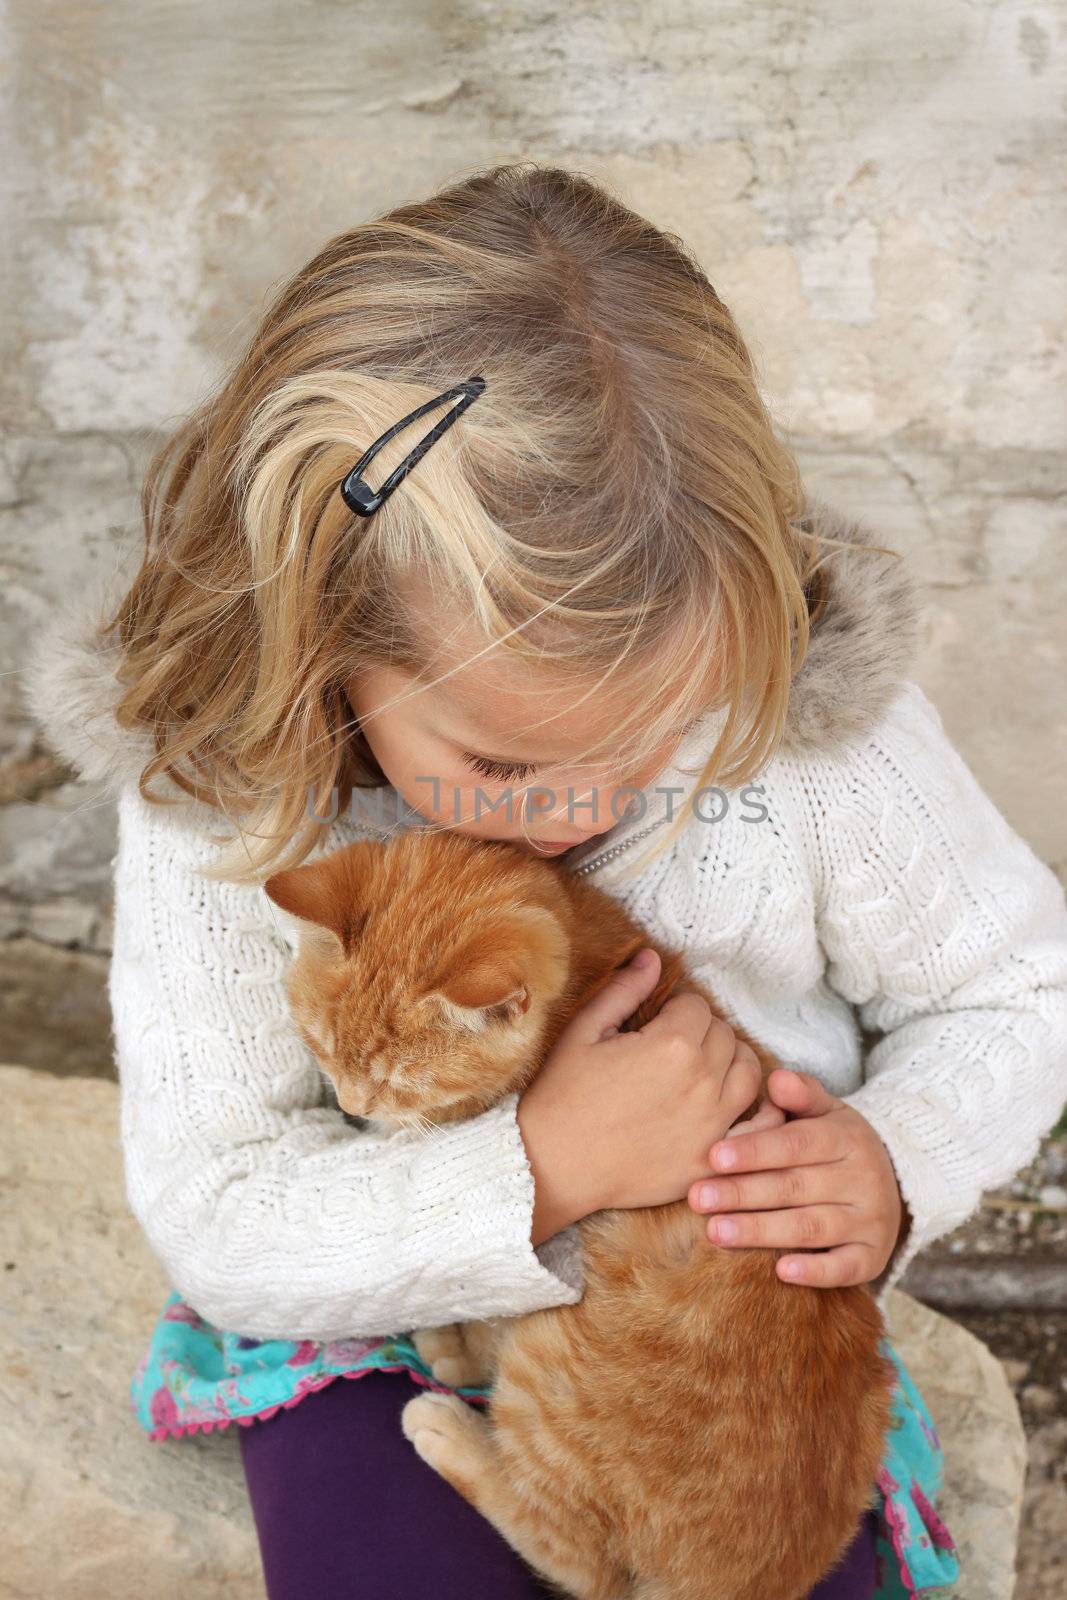 5 year old girl holding a cat